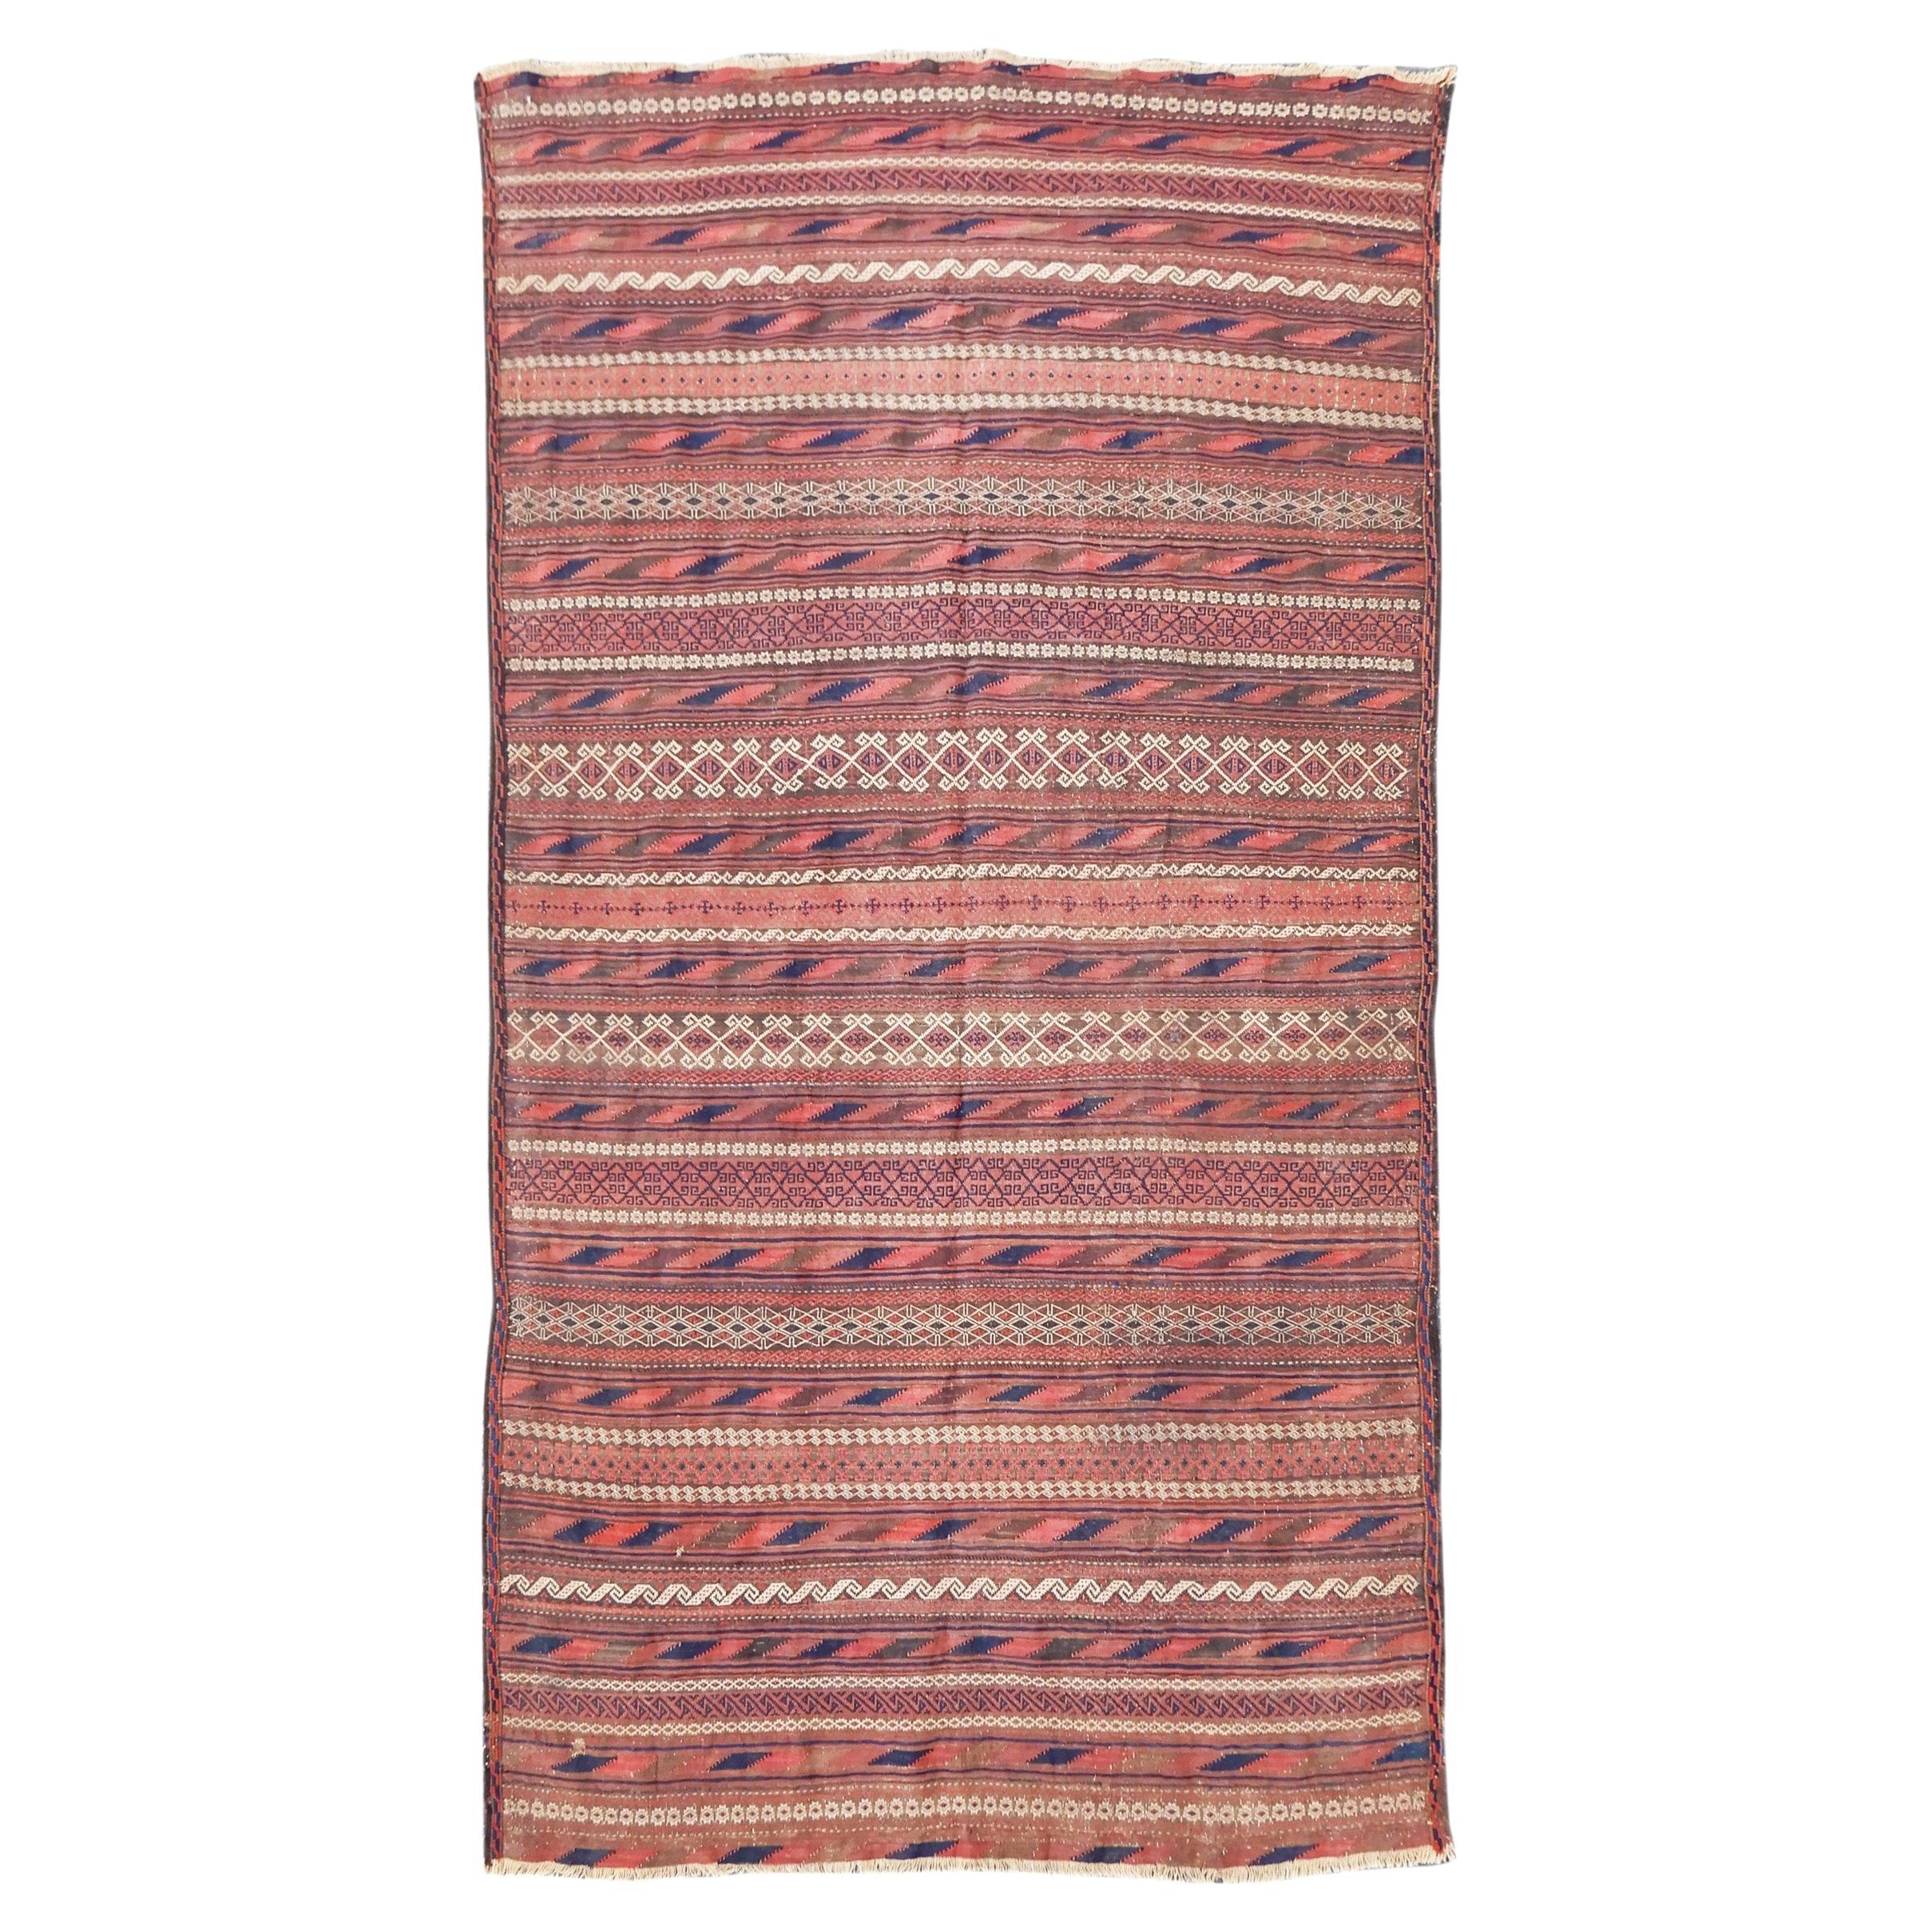 Antique Persian Baluch Flatwoven Rug, Late 19th century